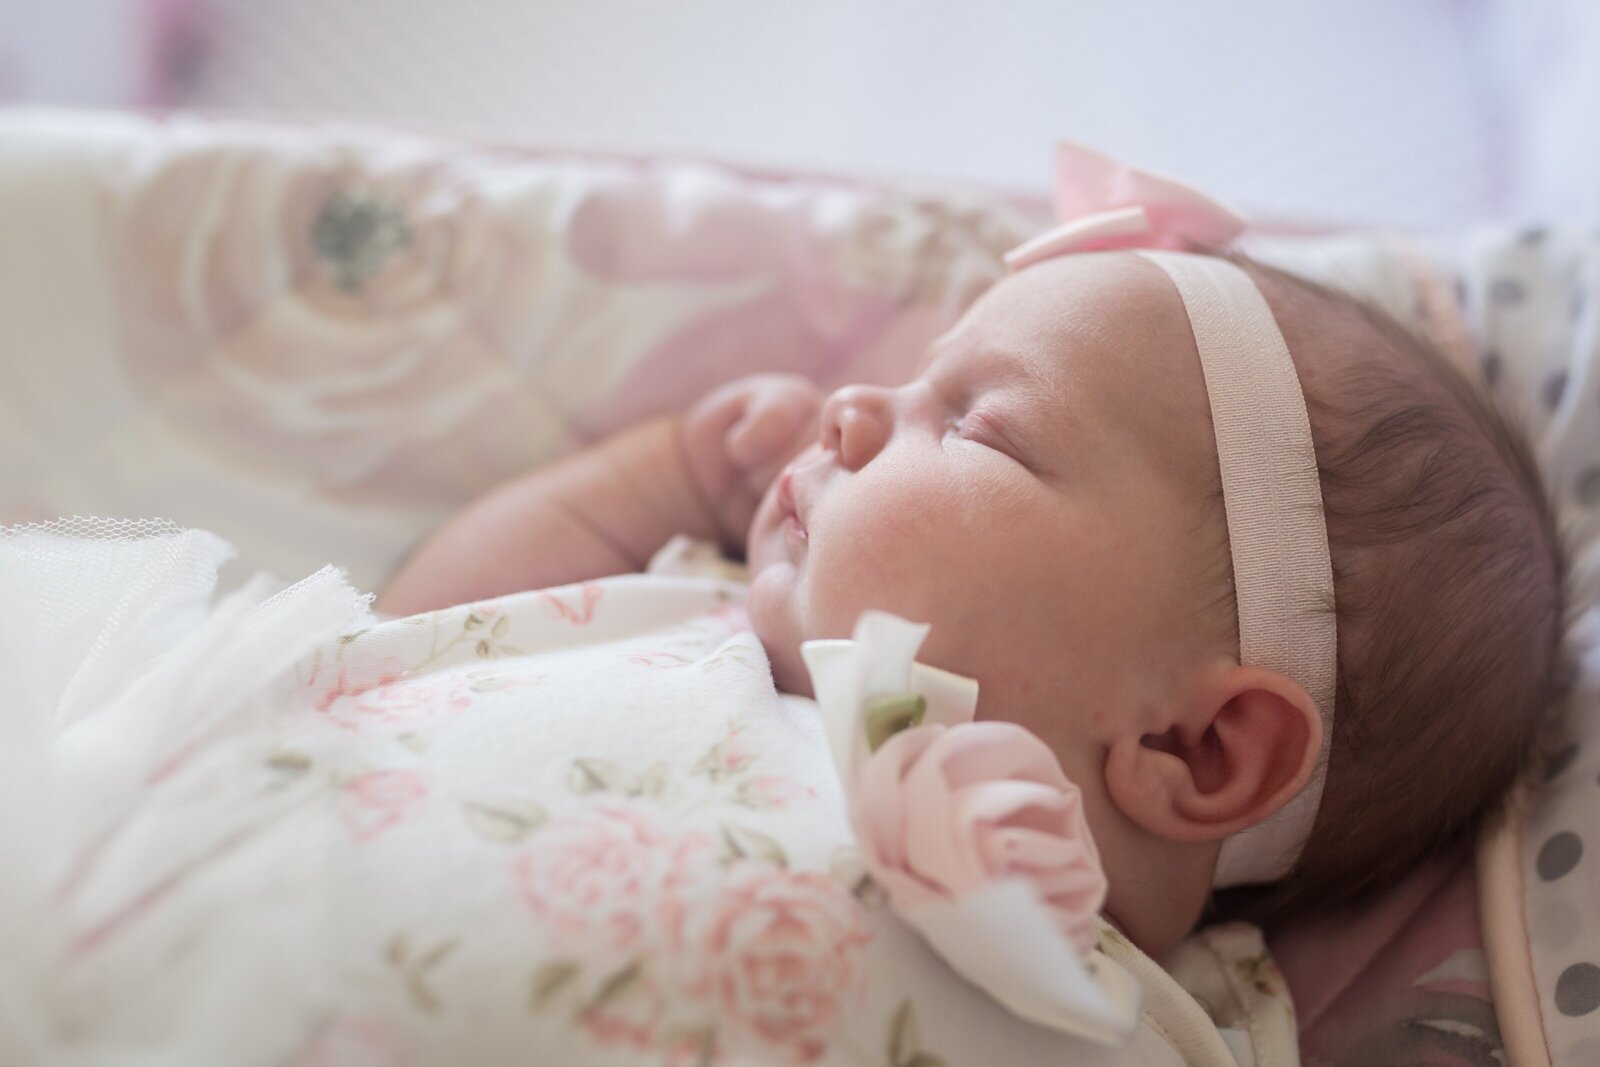 Newborn girl asleep in nursery during in home photo session.